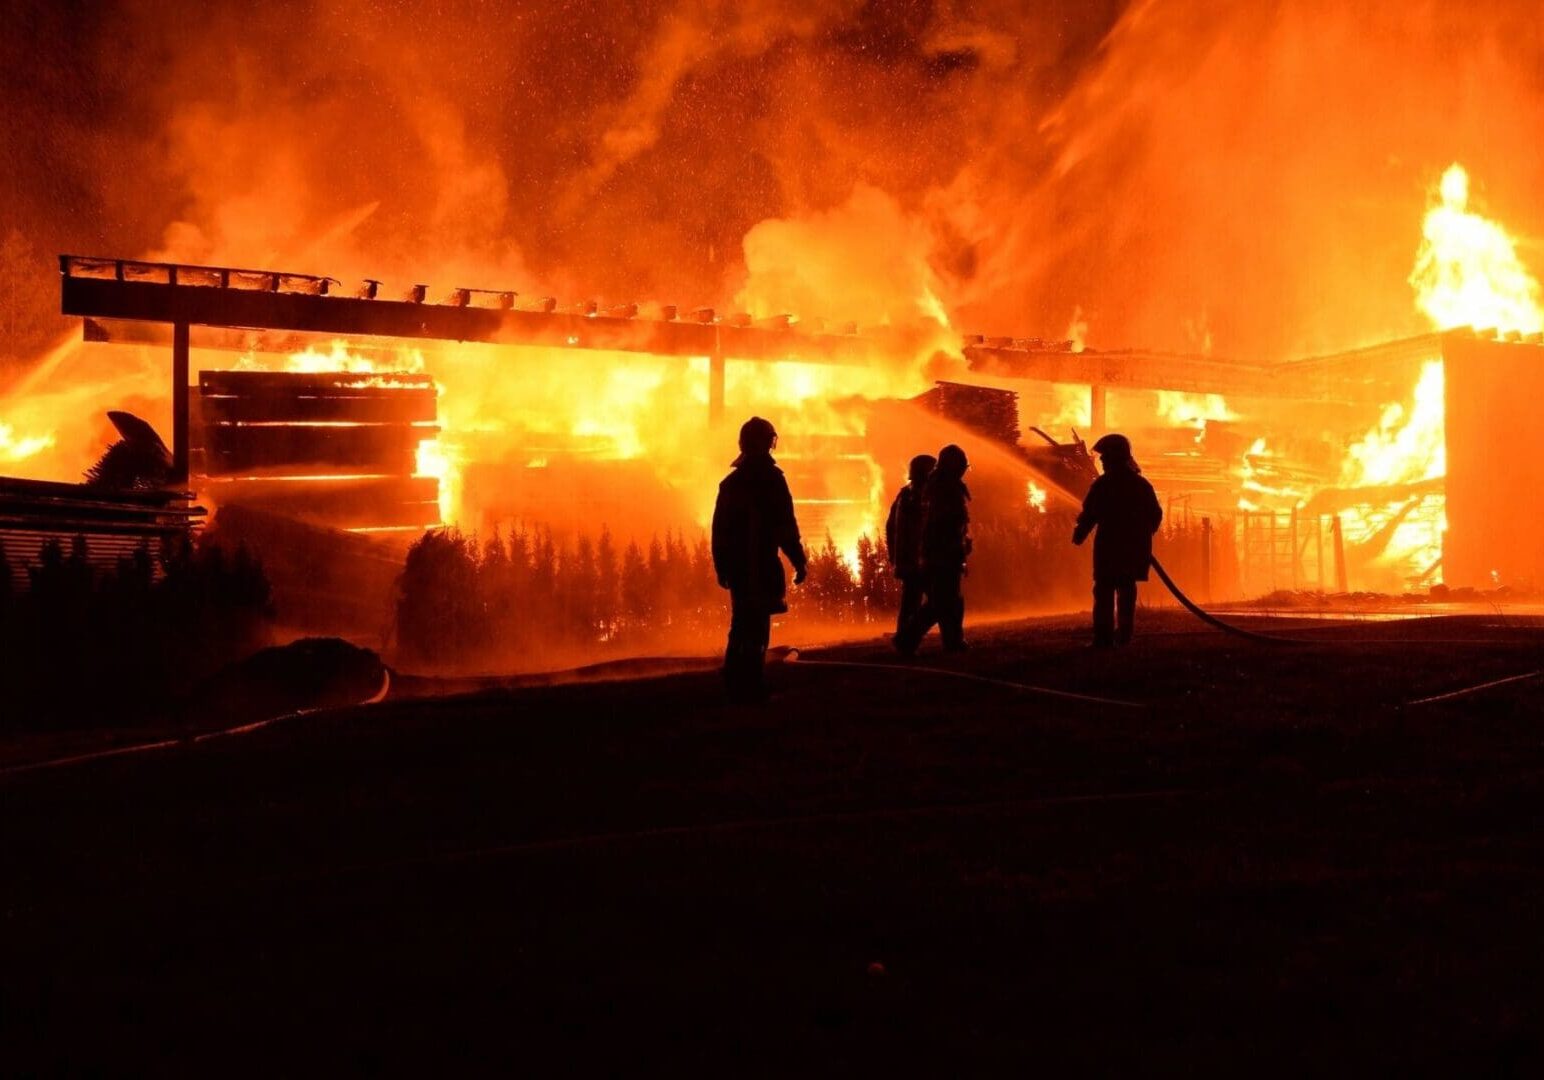 Firefighters standing in front of a massive blaze at night, actively working to extinguish a large building fire.